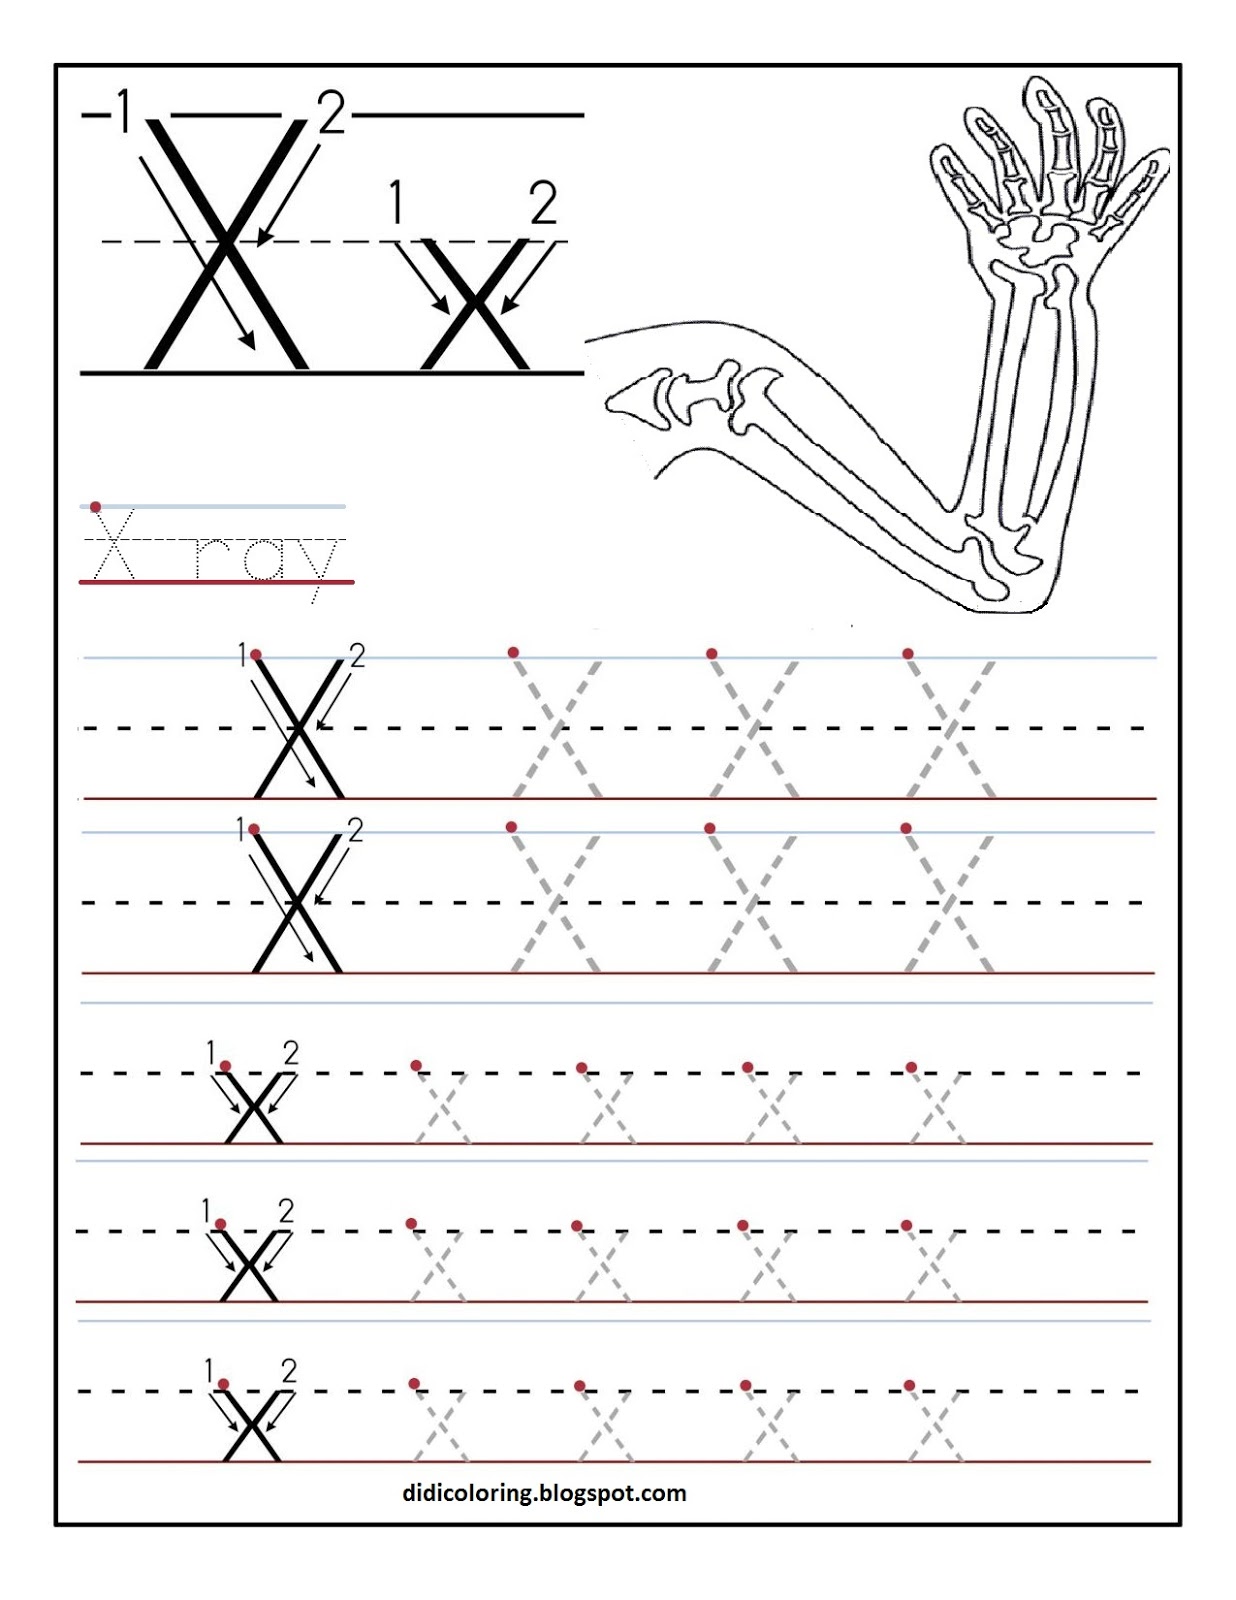 Didi coloring Page: Free printable worksheet letter X for your child to